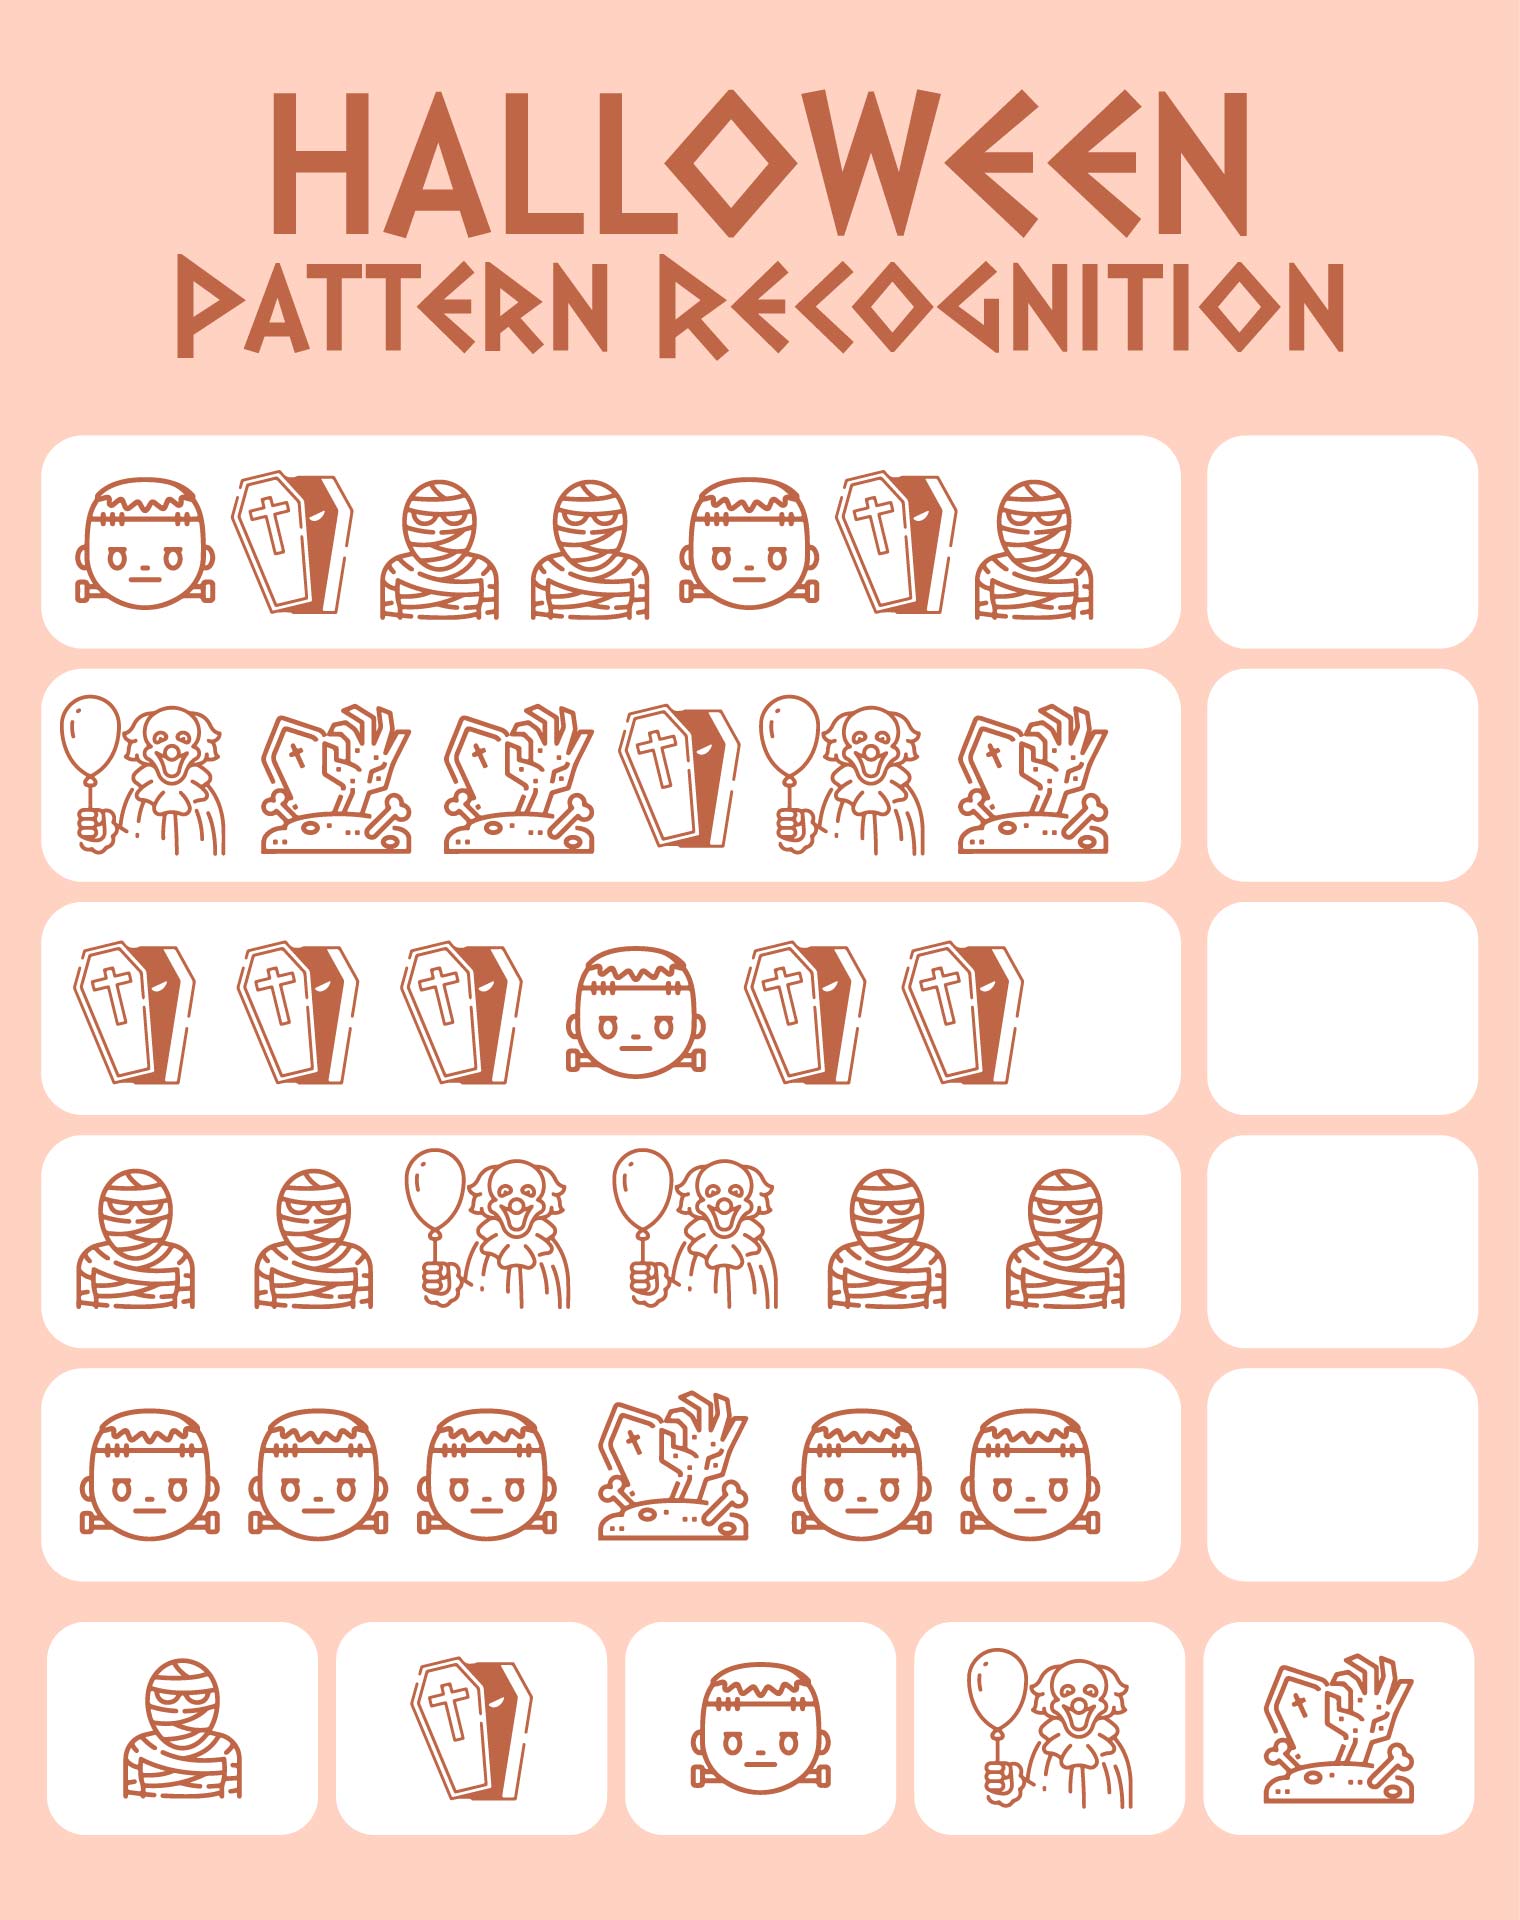 Halloween Pattern Recognition Worksheets Printable